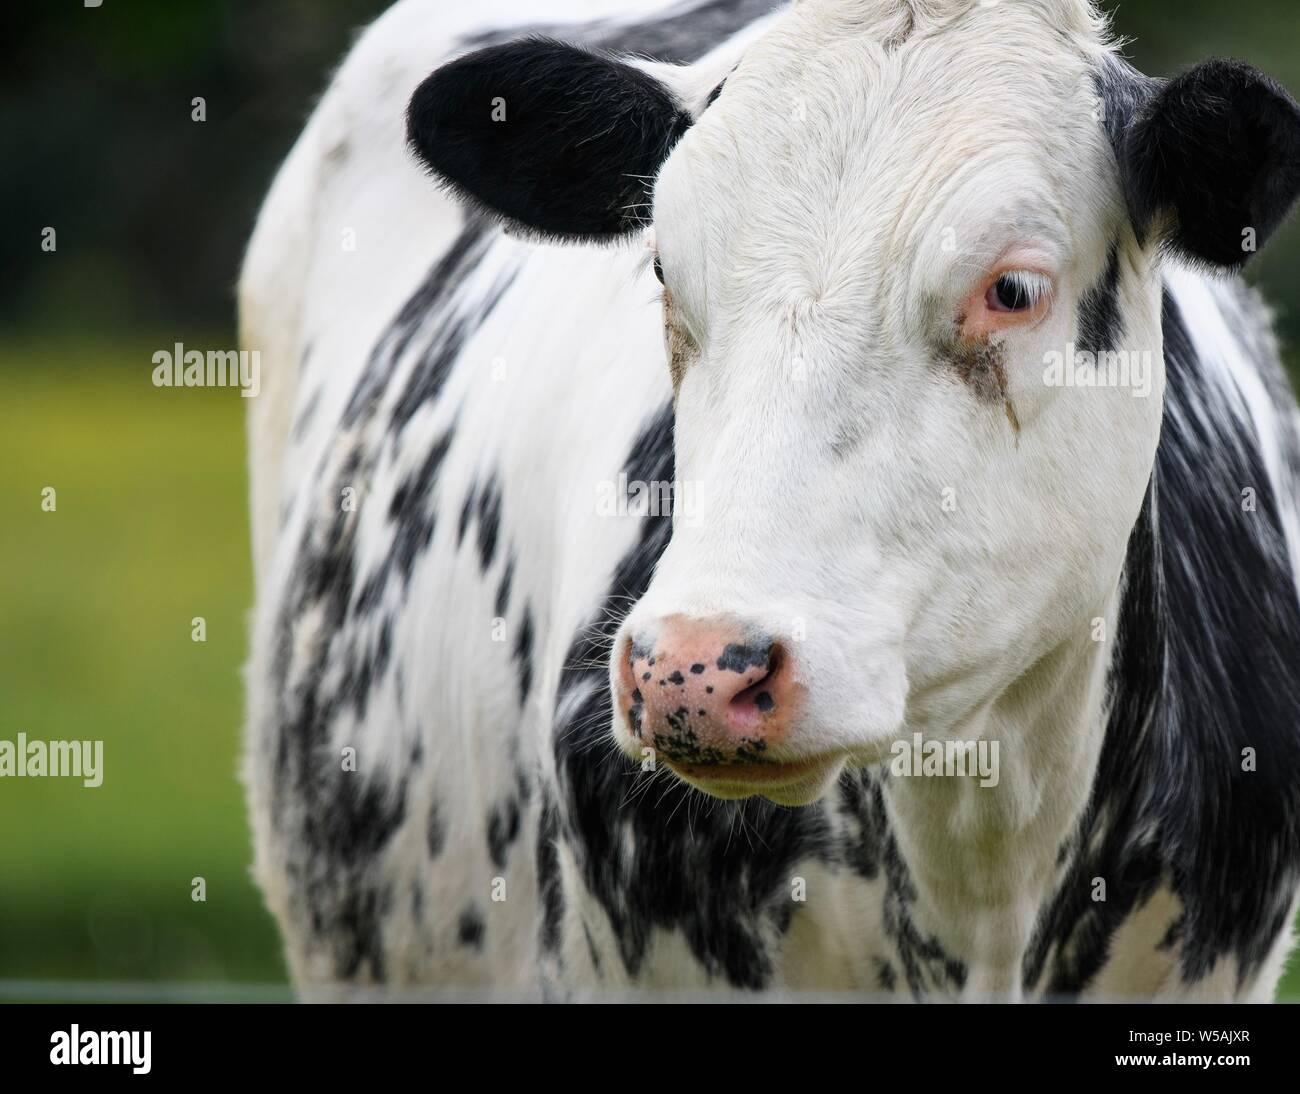 A close up photo of a black and white cow Stock Photo